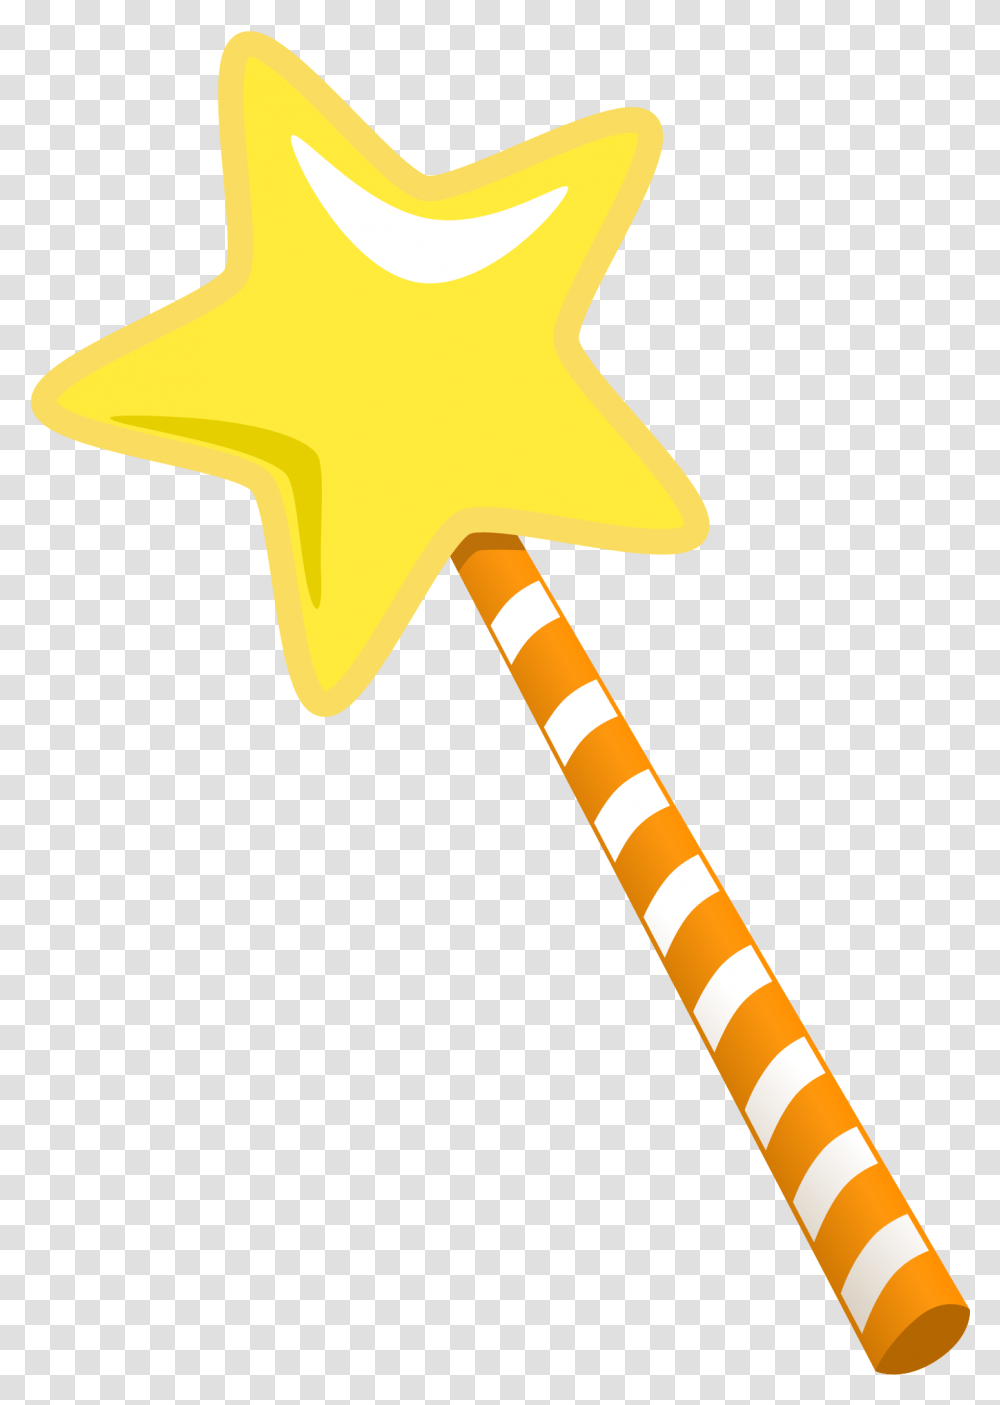 Magic Wand Cartoon Style Clip Arts Covid 19 Campaign, Axe, Tool, Hammer Transparent Png